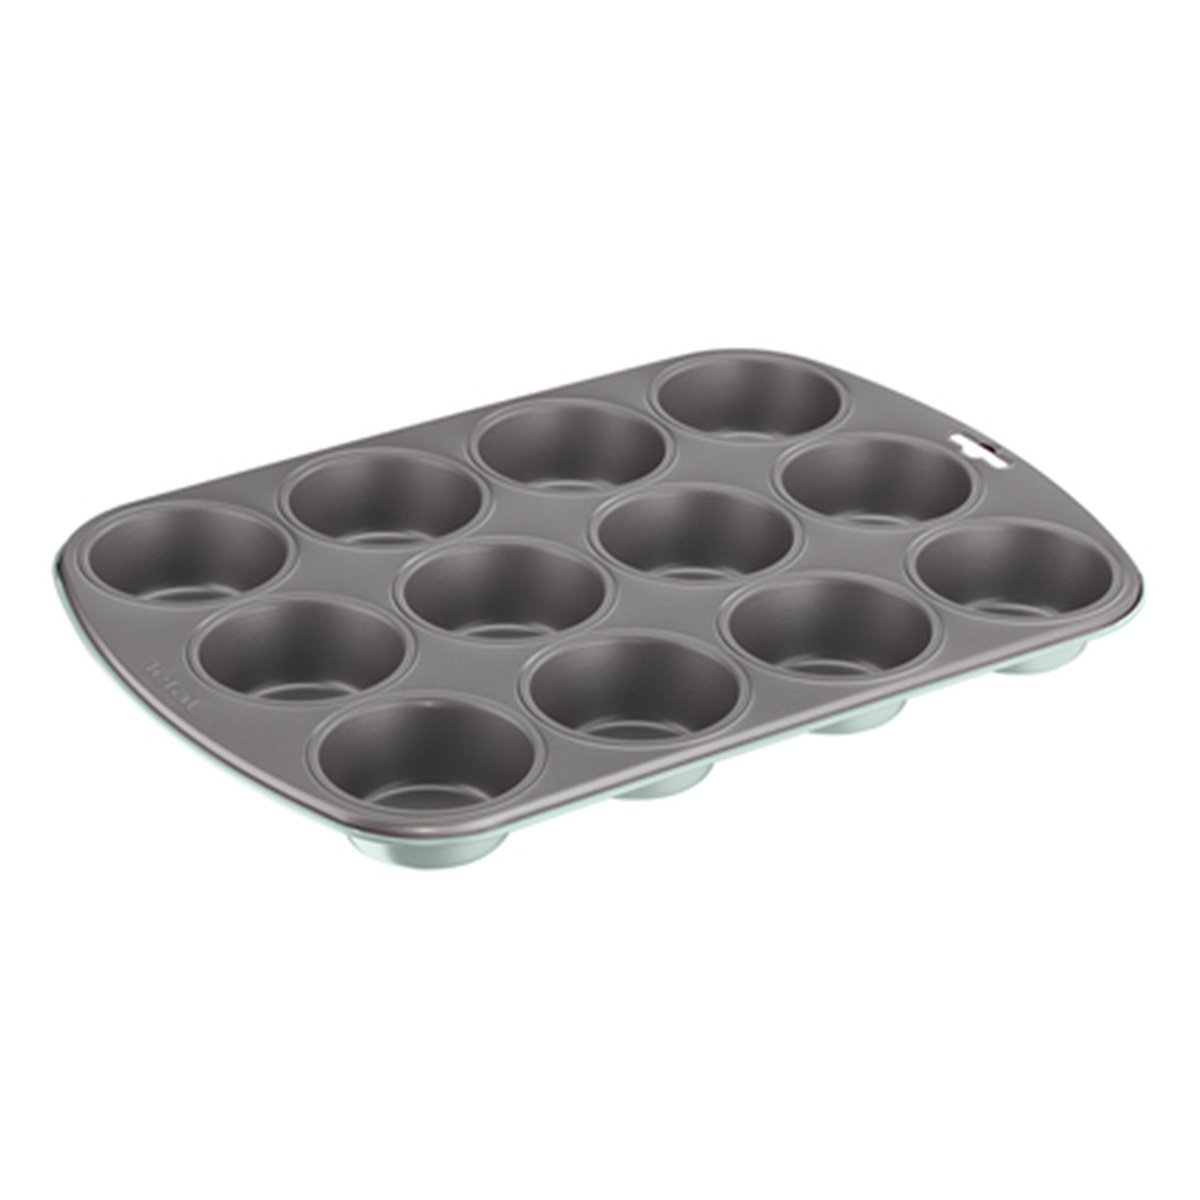 Tefal Color Edition Muffins Pan J1675014 12Cups